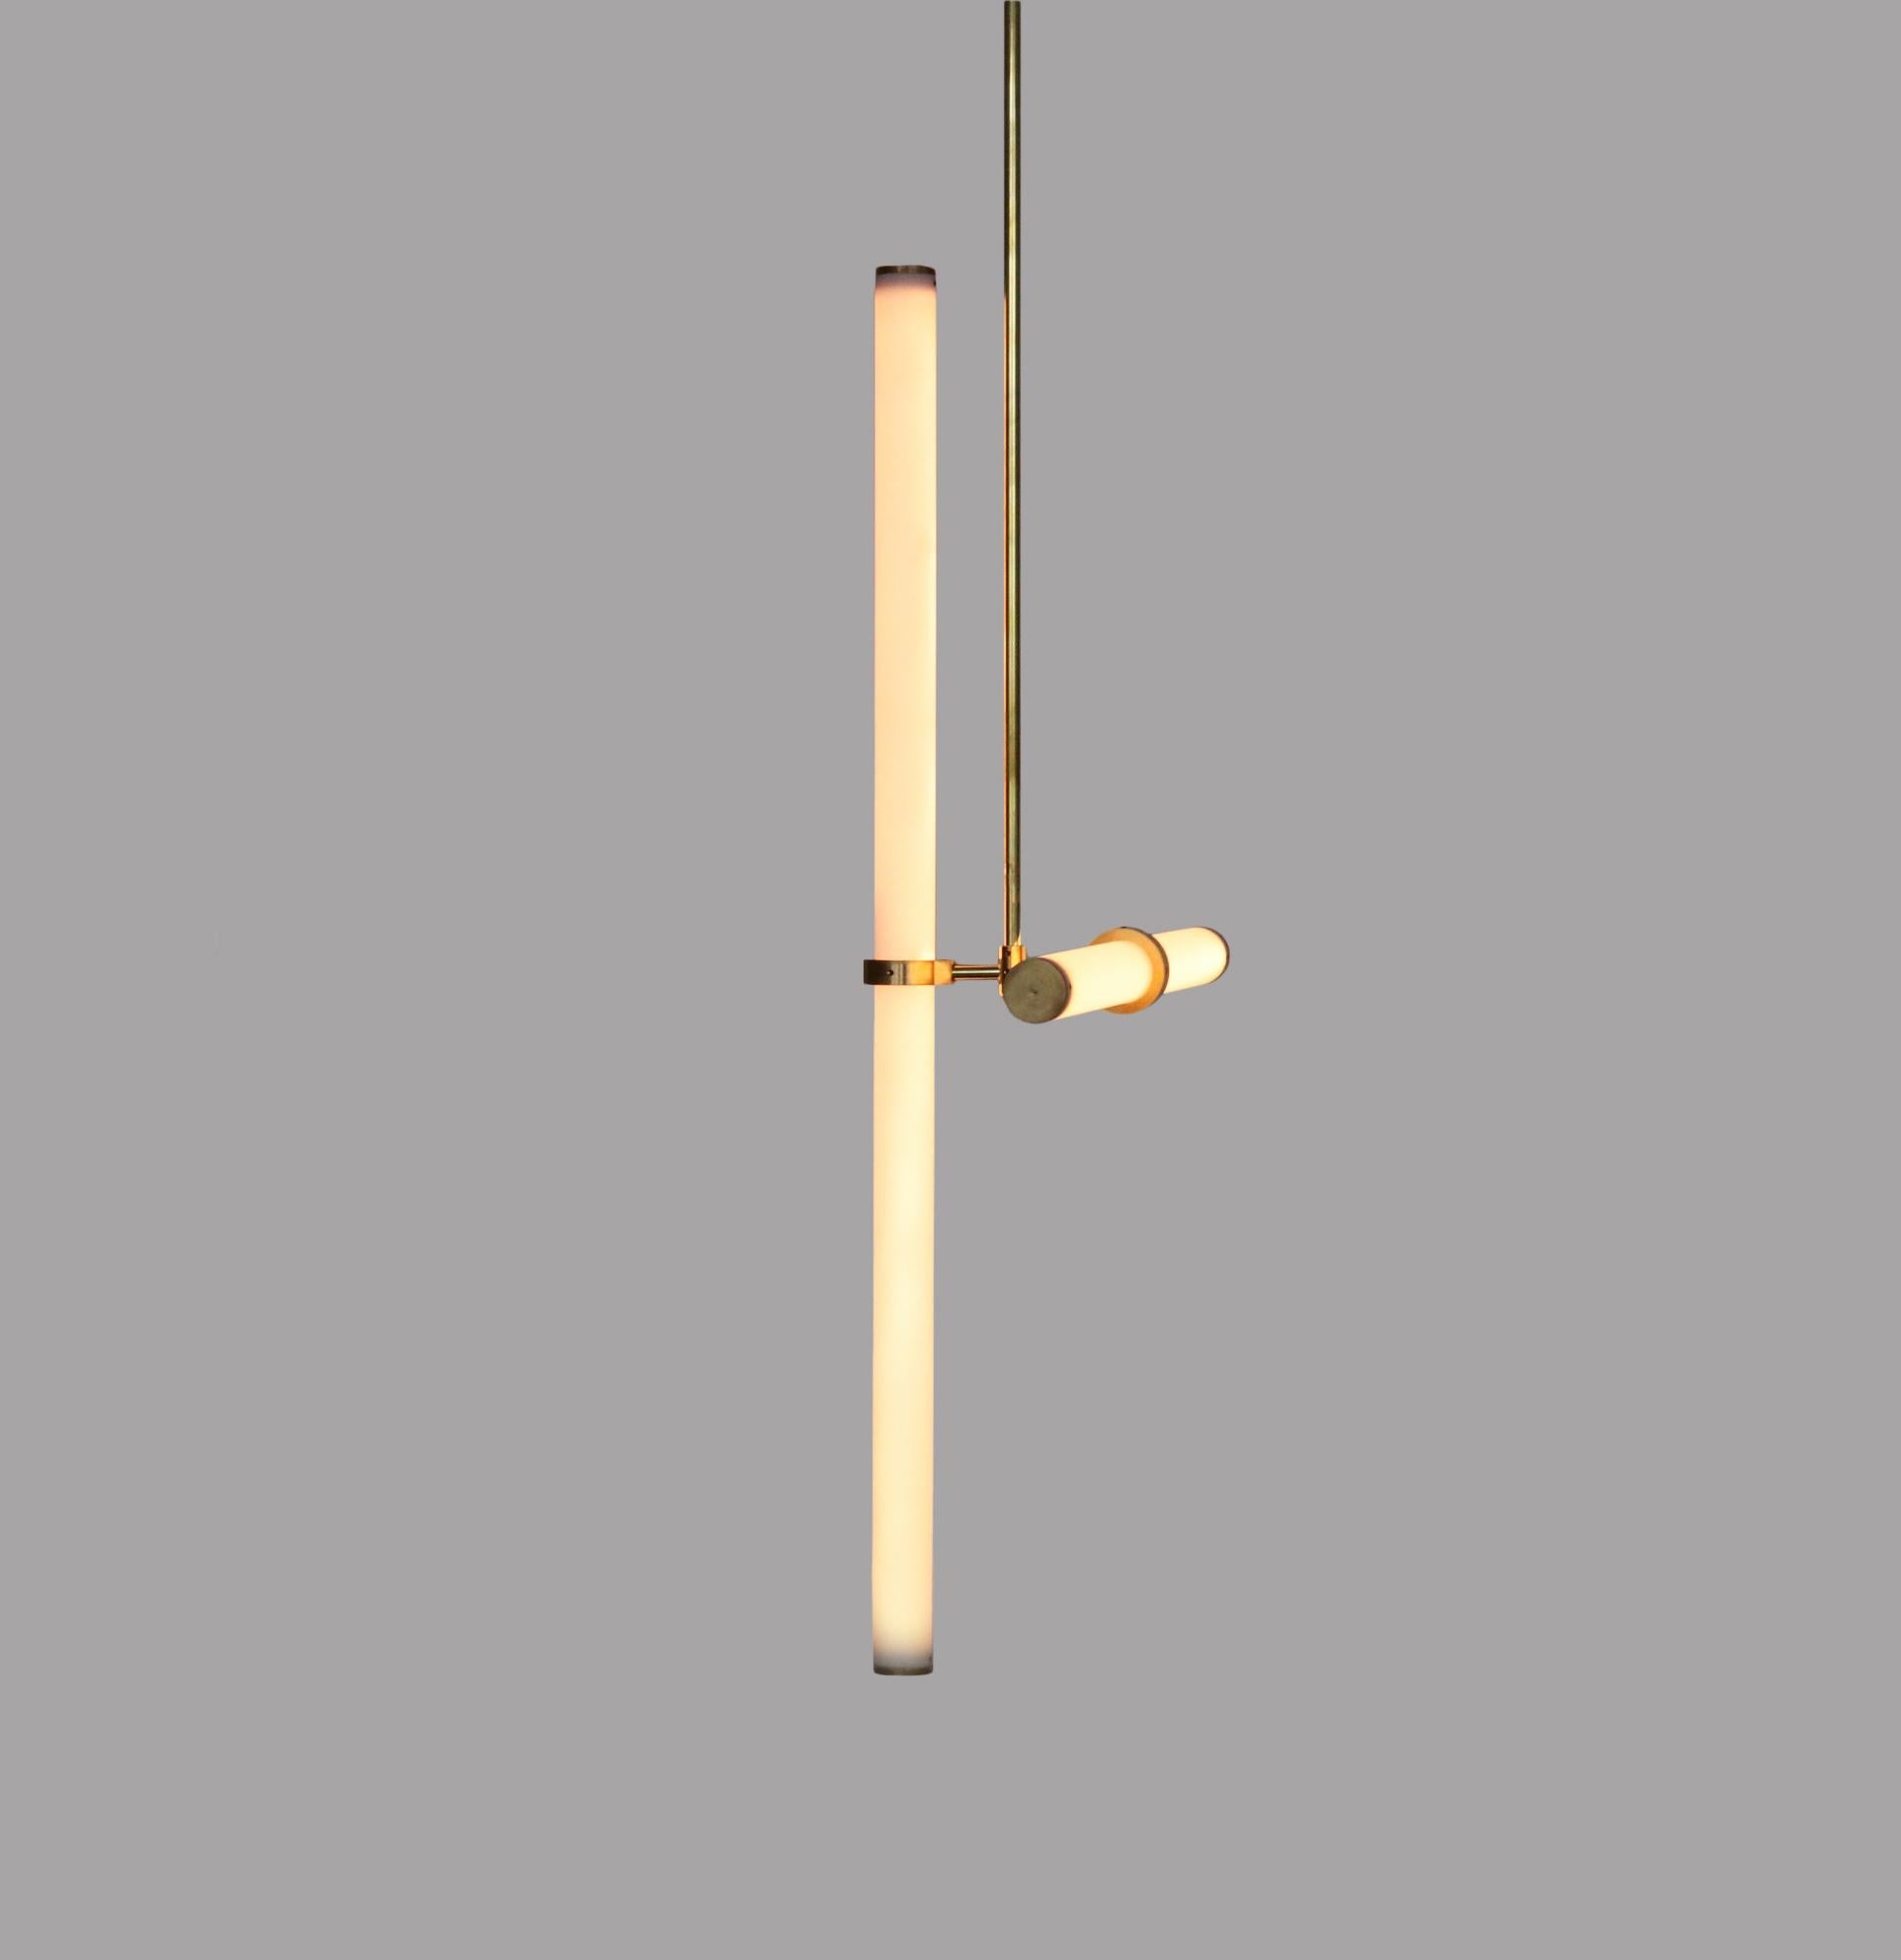 Light object 019 by Naama Hofman
Dimensions: W 40, H 120 cm (height to order)
Natural brass
Light tube diameter: 35 mm
Light tube length: 1 x 80 cm and 1 x 40 cm
Brass pipe diameter: 10 mm
Canopy diameter: 20 cm

Voltage: 110-240
CE